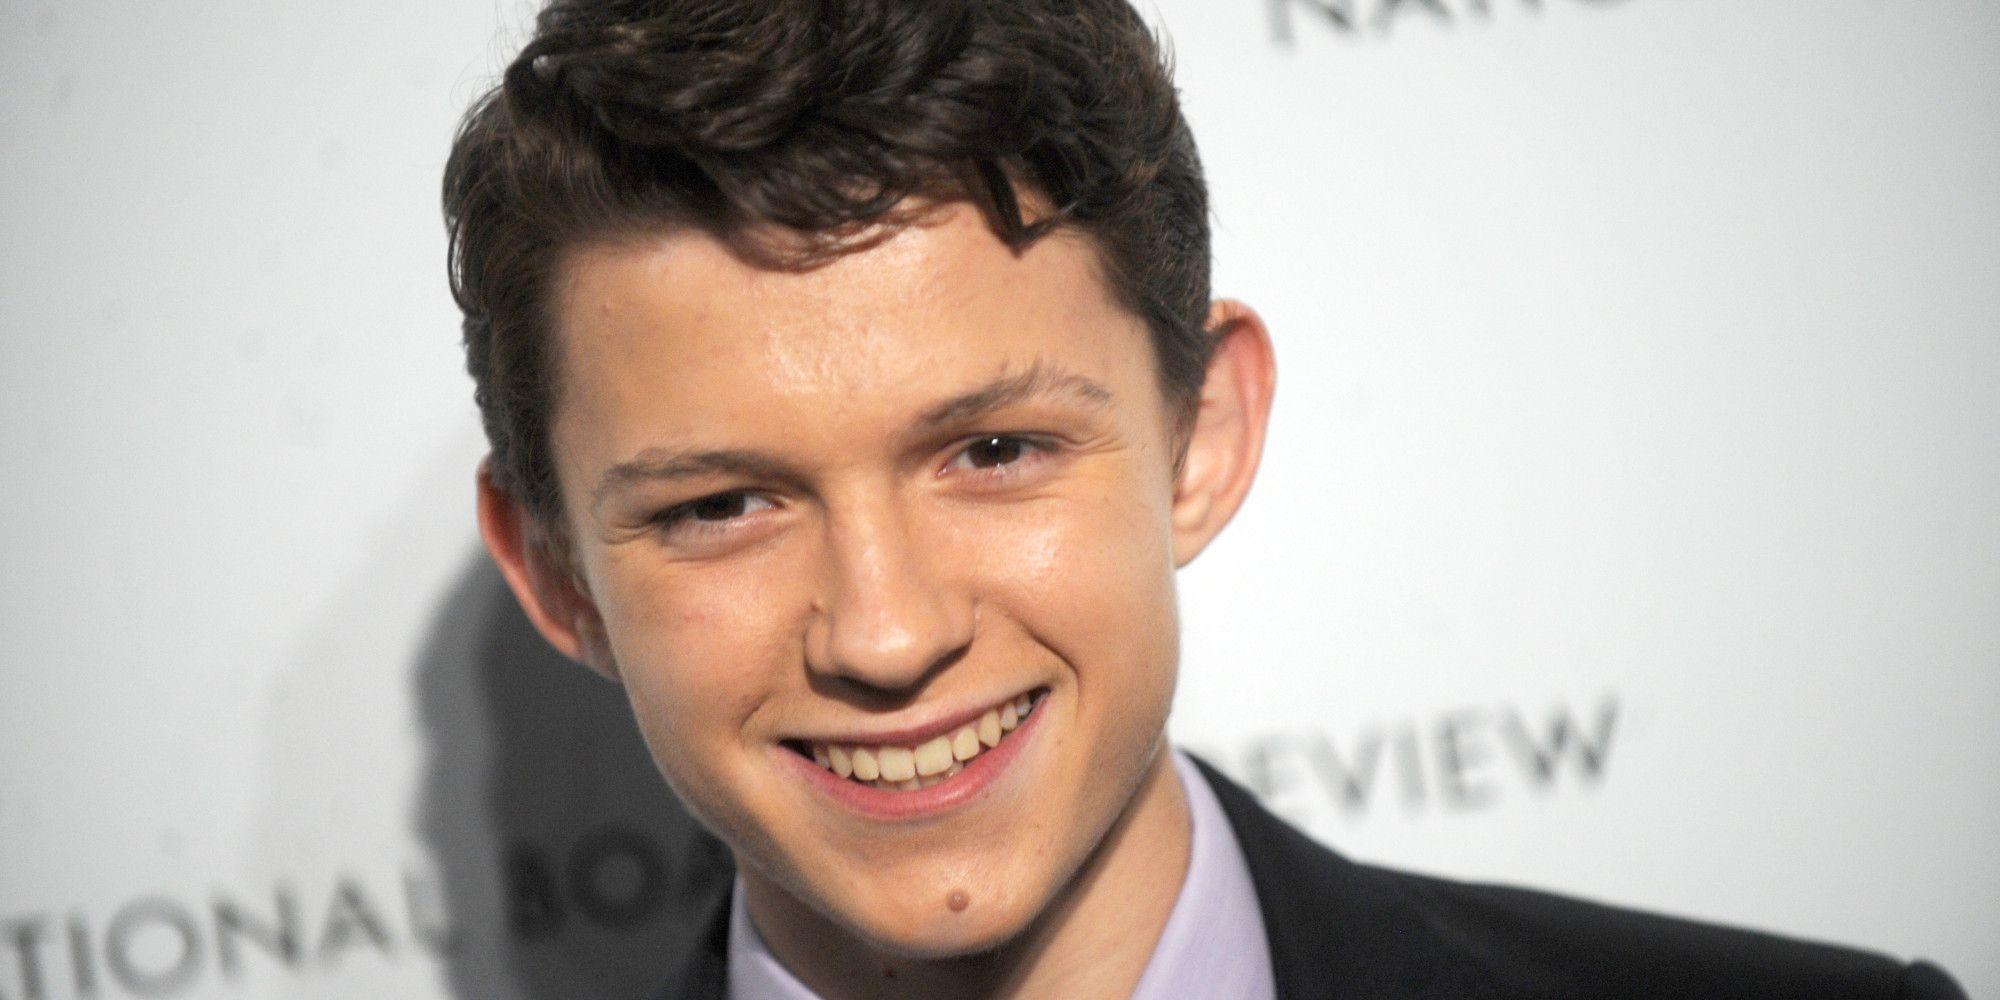 Tom Holland Wallpaper High Resolution and Quality Download